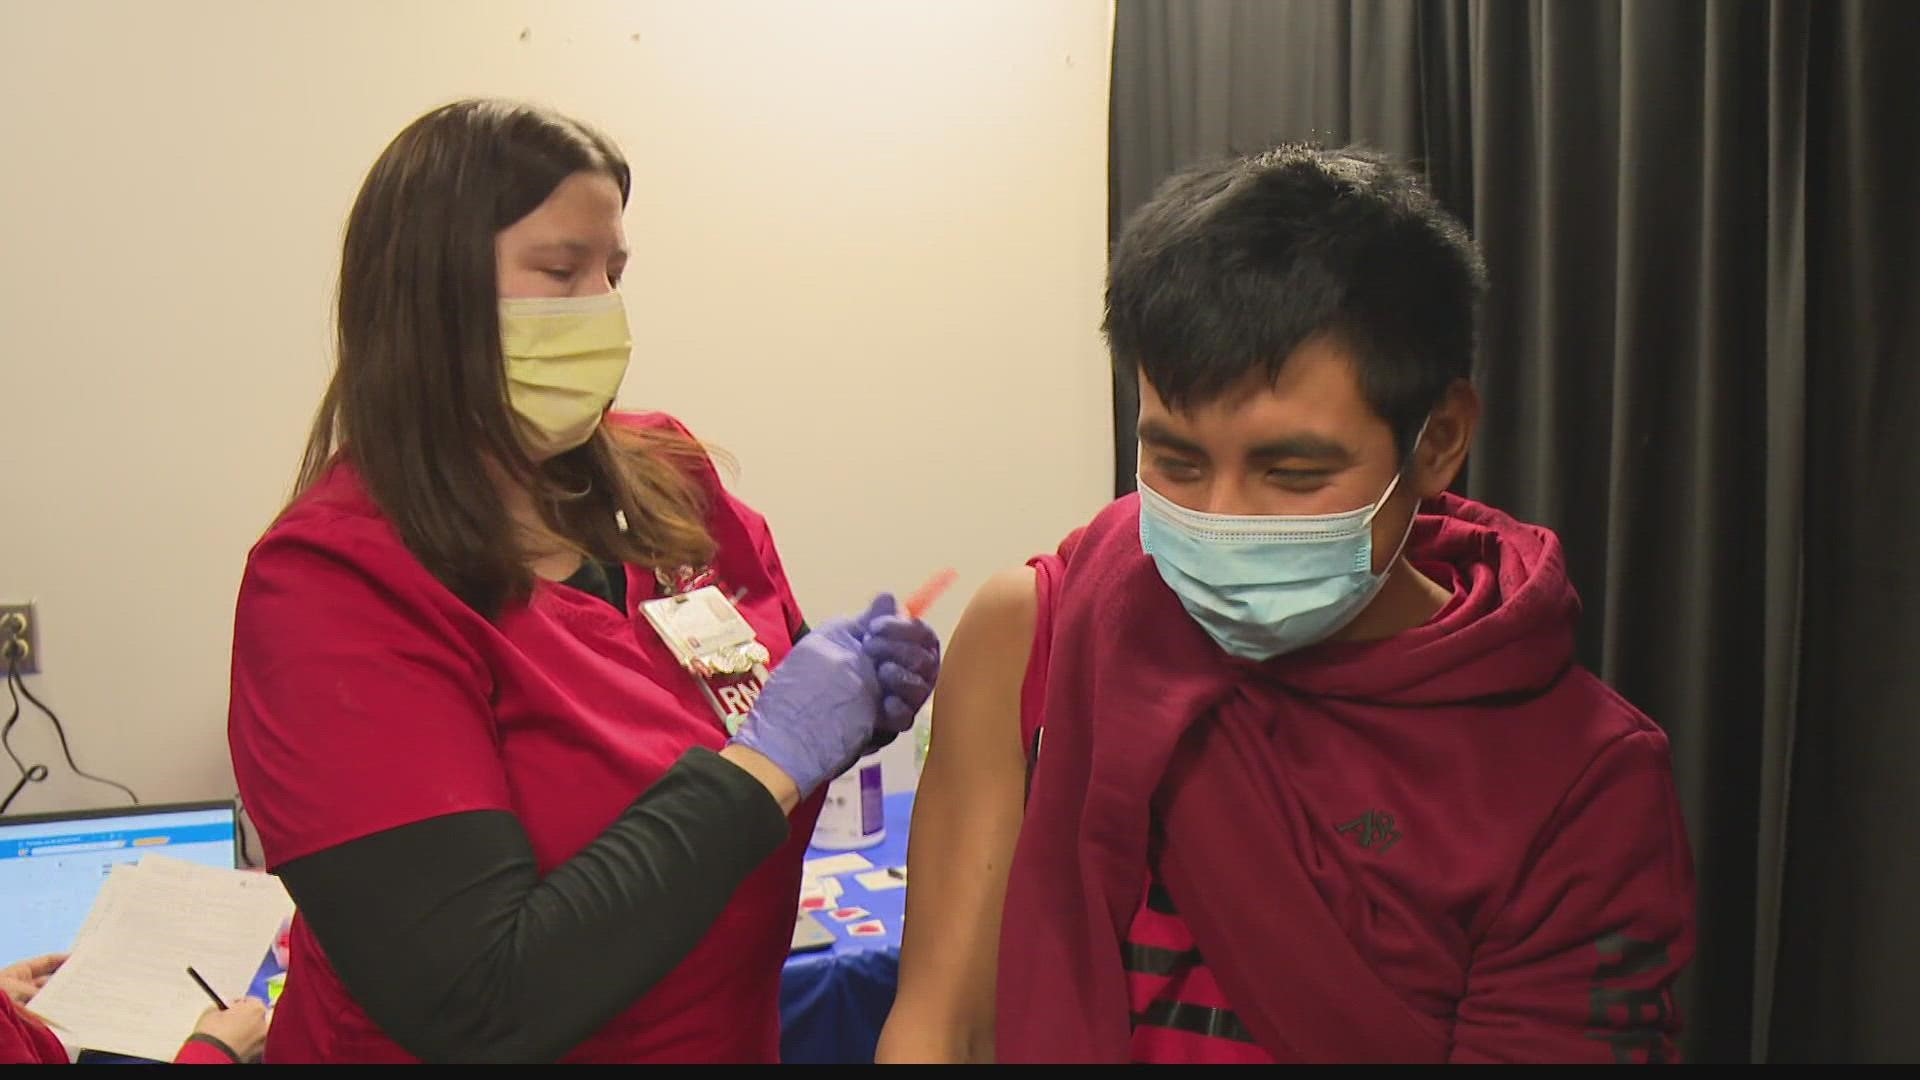 About 300 people received the COVID vaccine or booster shot and 90 others got their flu shot at the Riley Hospital clinic at the Children's Museum Thursday.